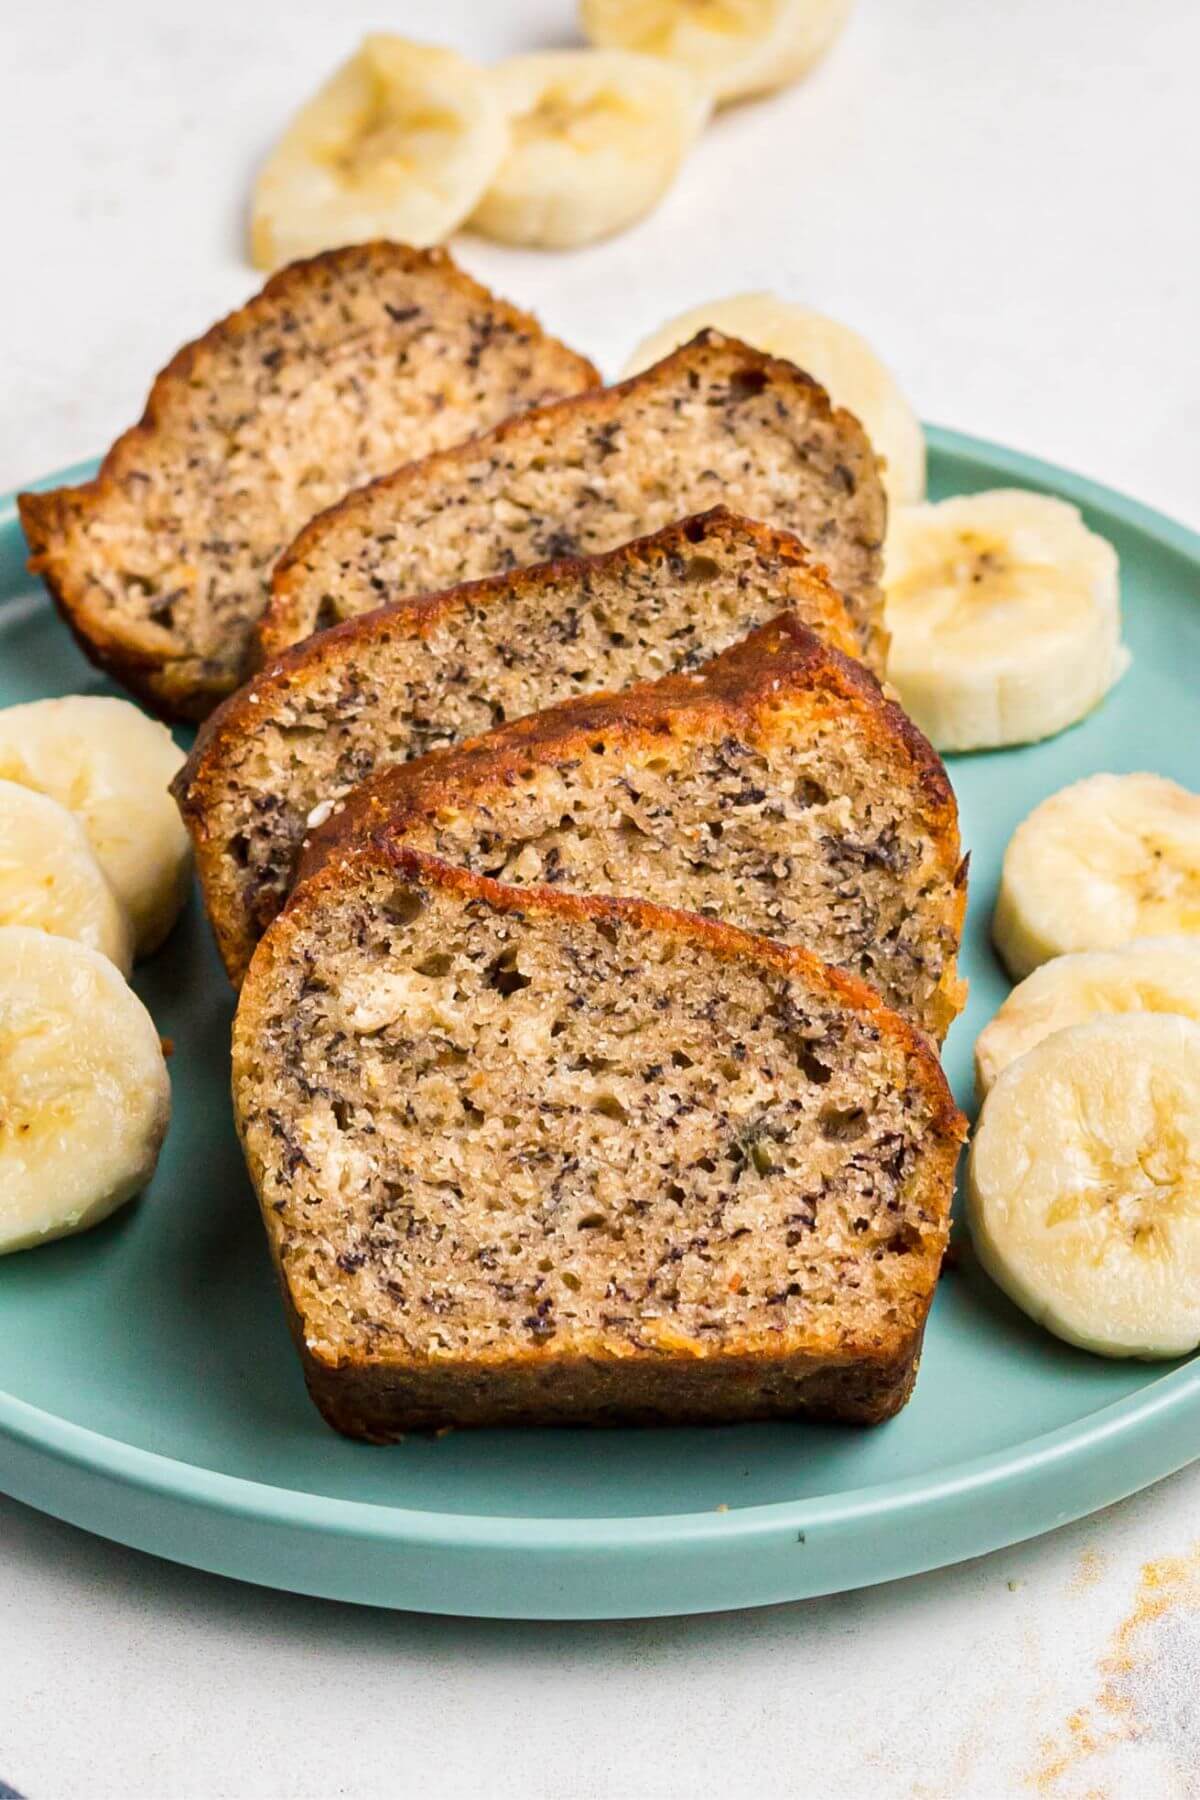 Golden brown baked banana bread sliced on a light green plate with slices of banana on the plate. 